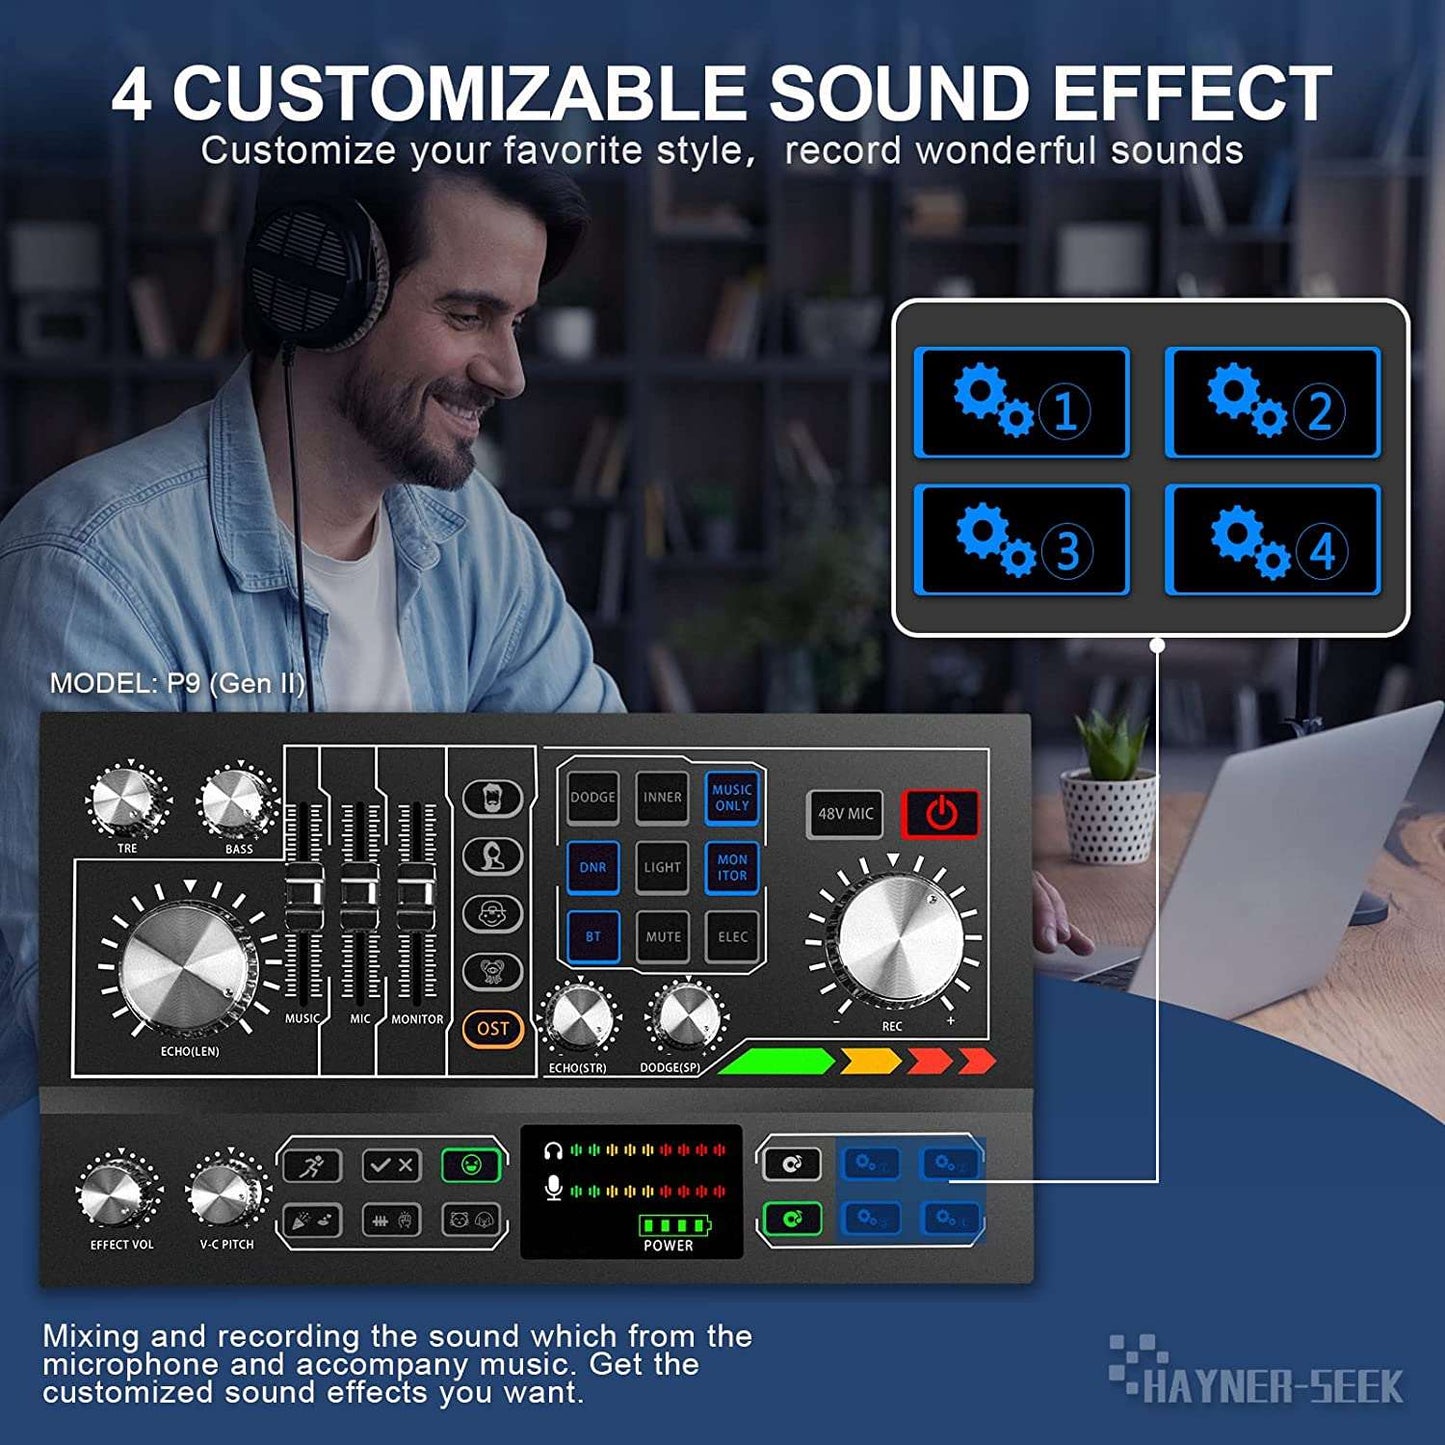 Podcast Equipment Bundle Aluminum Alloy Panel with Studio Condenser Microphone Sound DJ Mixer Broadcast ALL-IN-ONE Audio Interface [DIY Sound Effect] For PC/Laptop/Phone,Streaming/Recording, Black